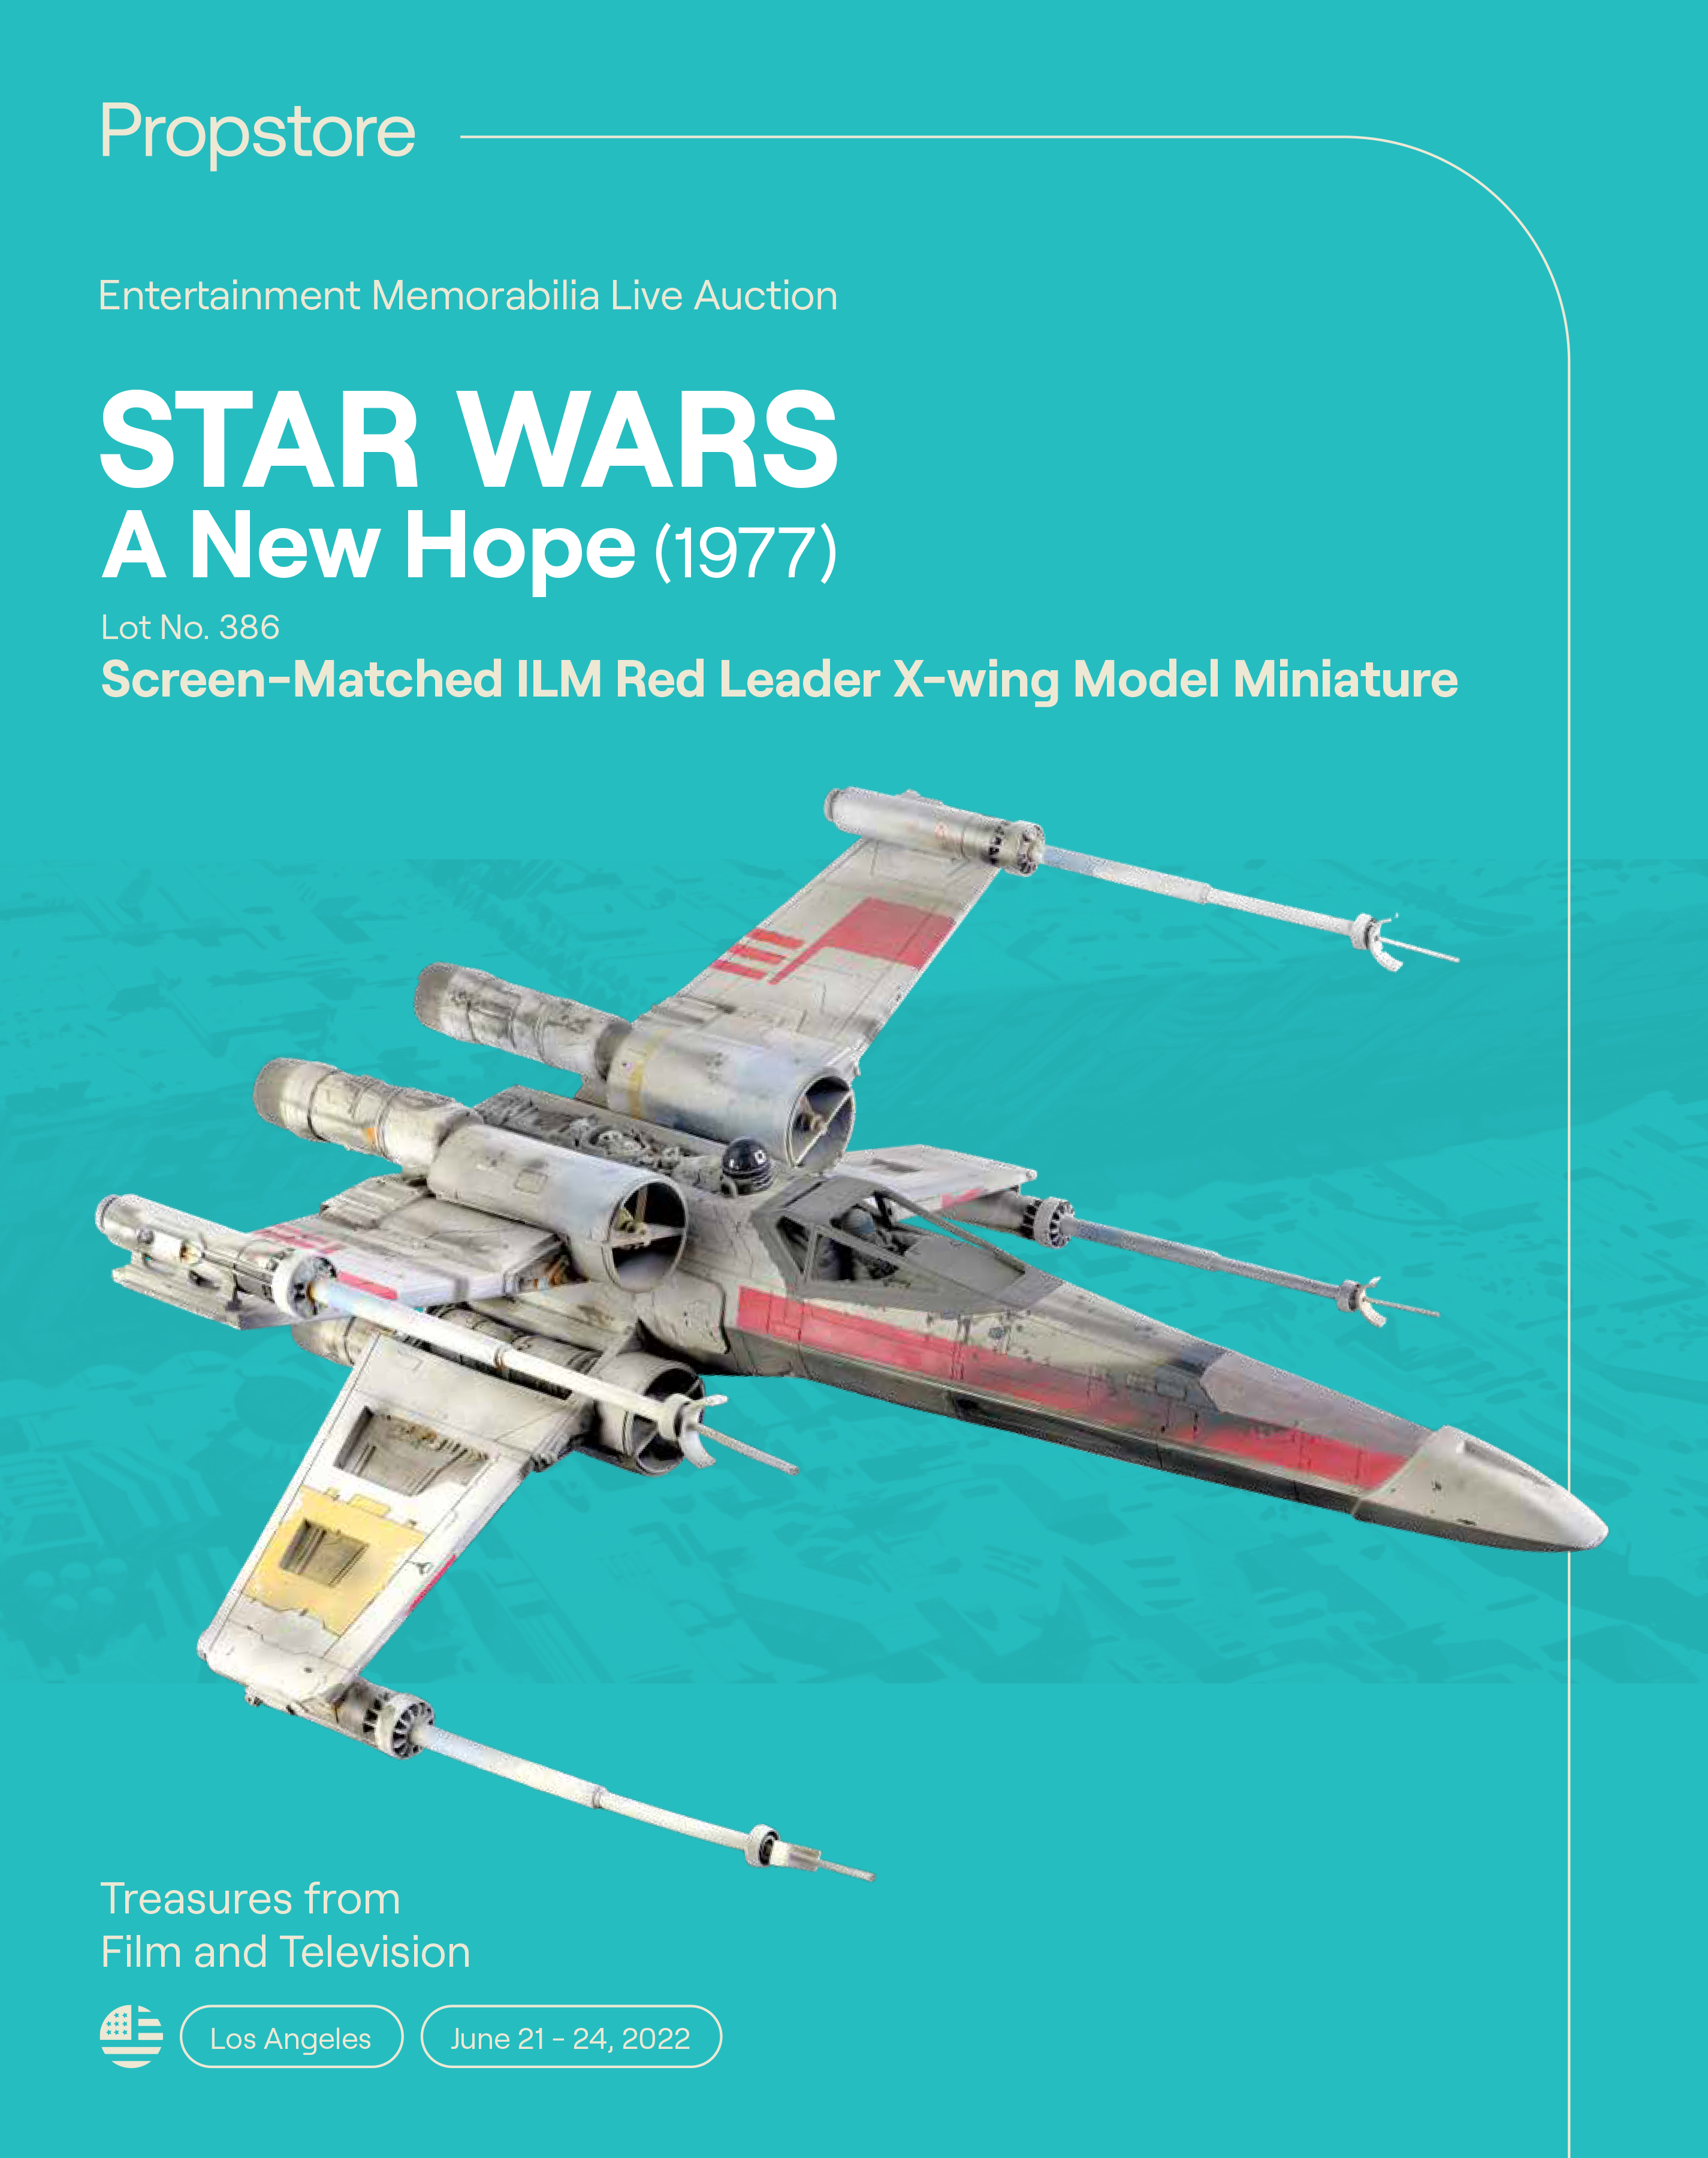 Screen-Matched ILM Red Leader X-wing Model Miniature